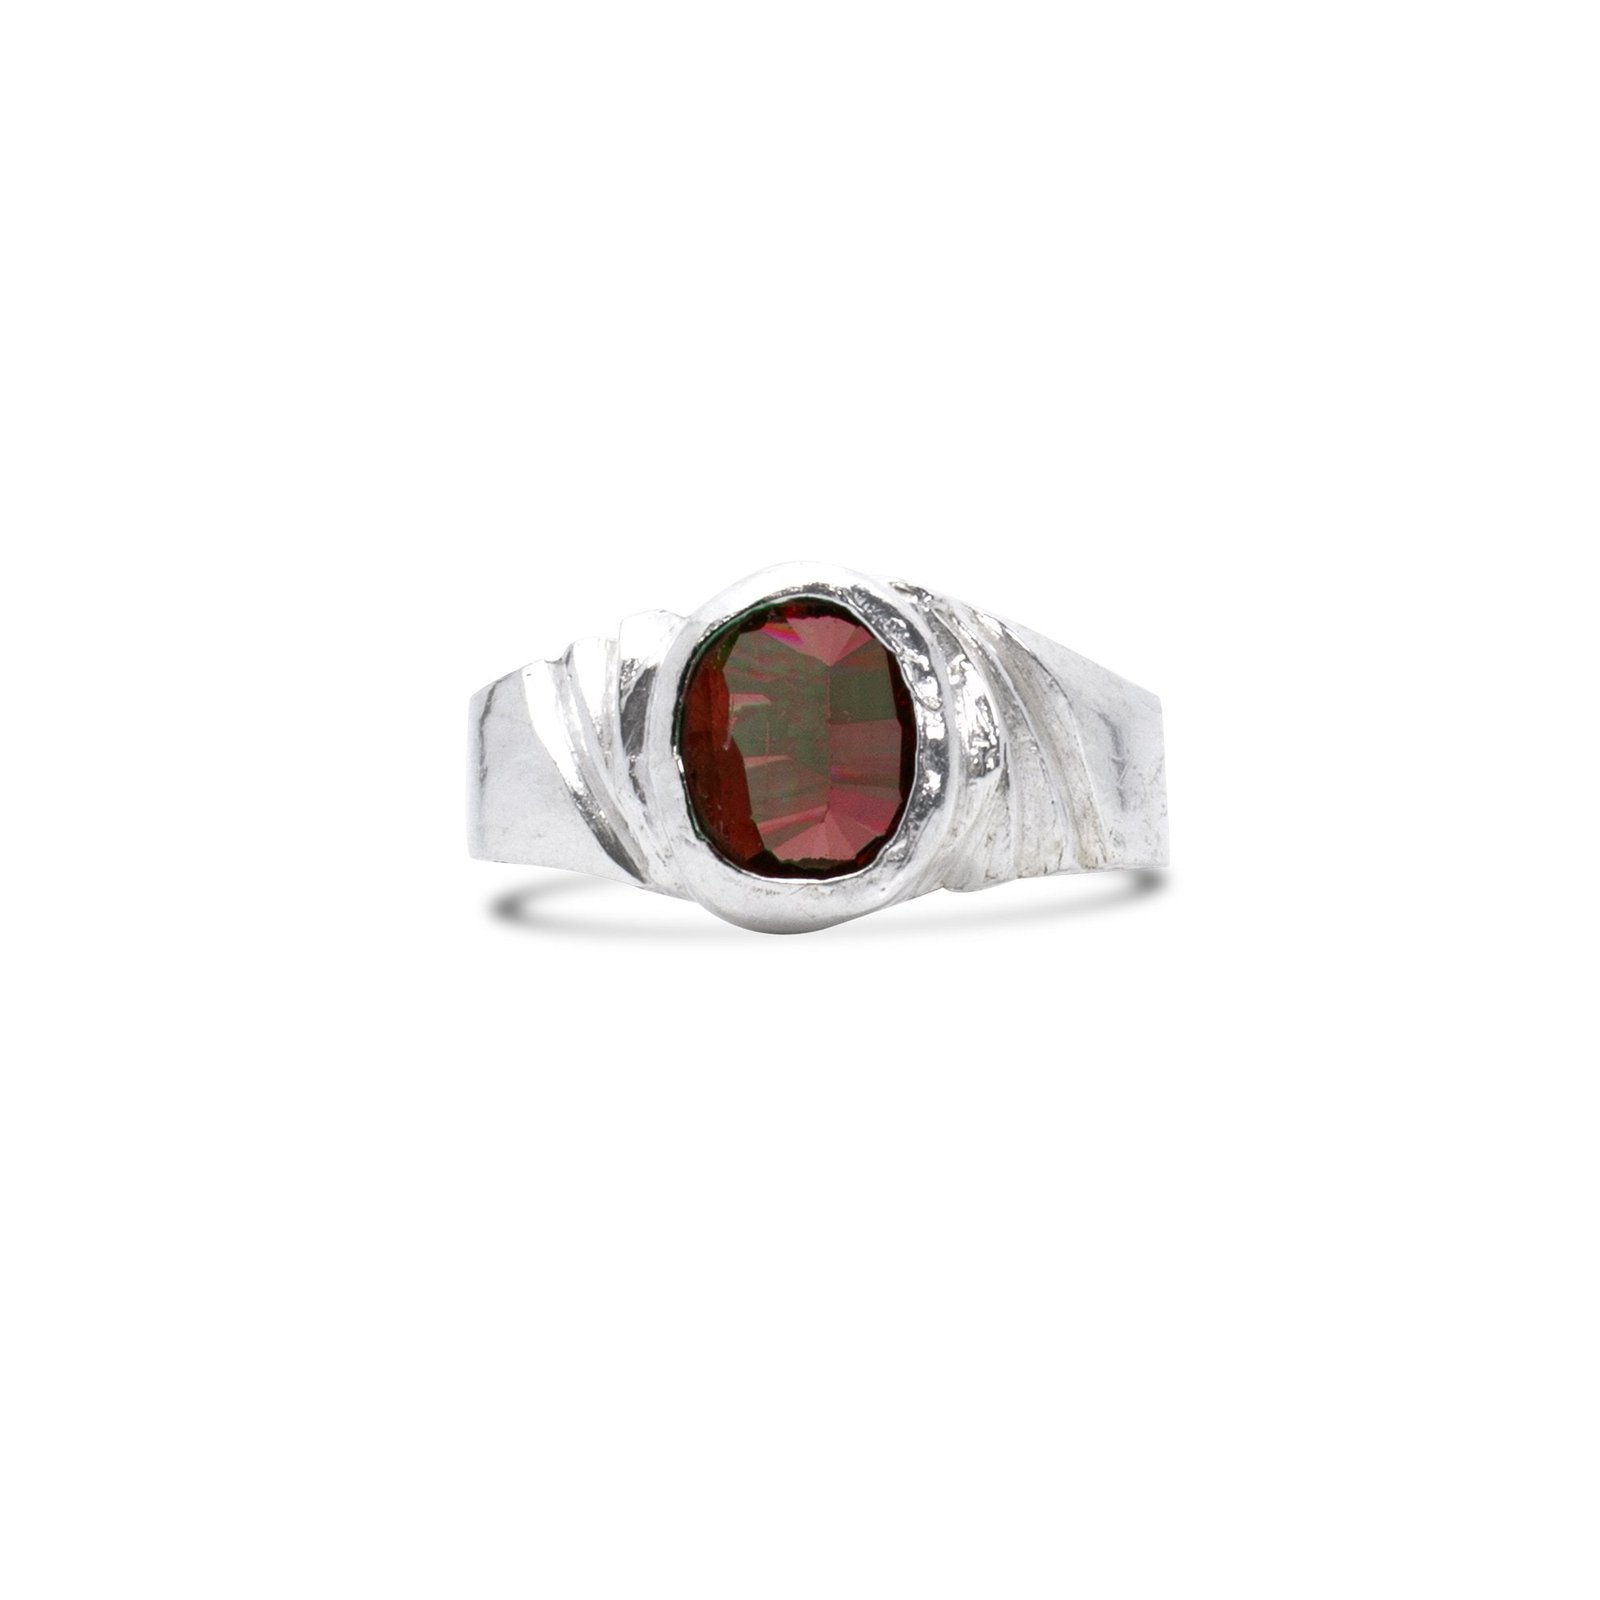 Jeeva certified Hessonite (Gomed) 7.25 Ratti or 6.55 cts stone Ring in Gold  plated panchdhatu metal for men and women | Fancy jewellery, Hessonite, Stone  rings